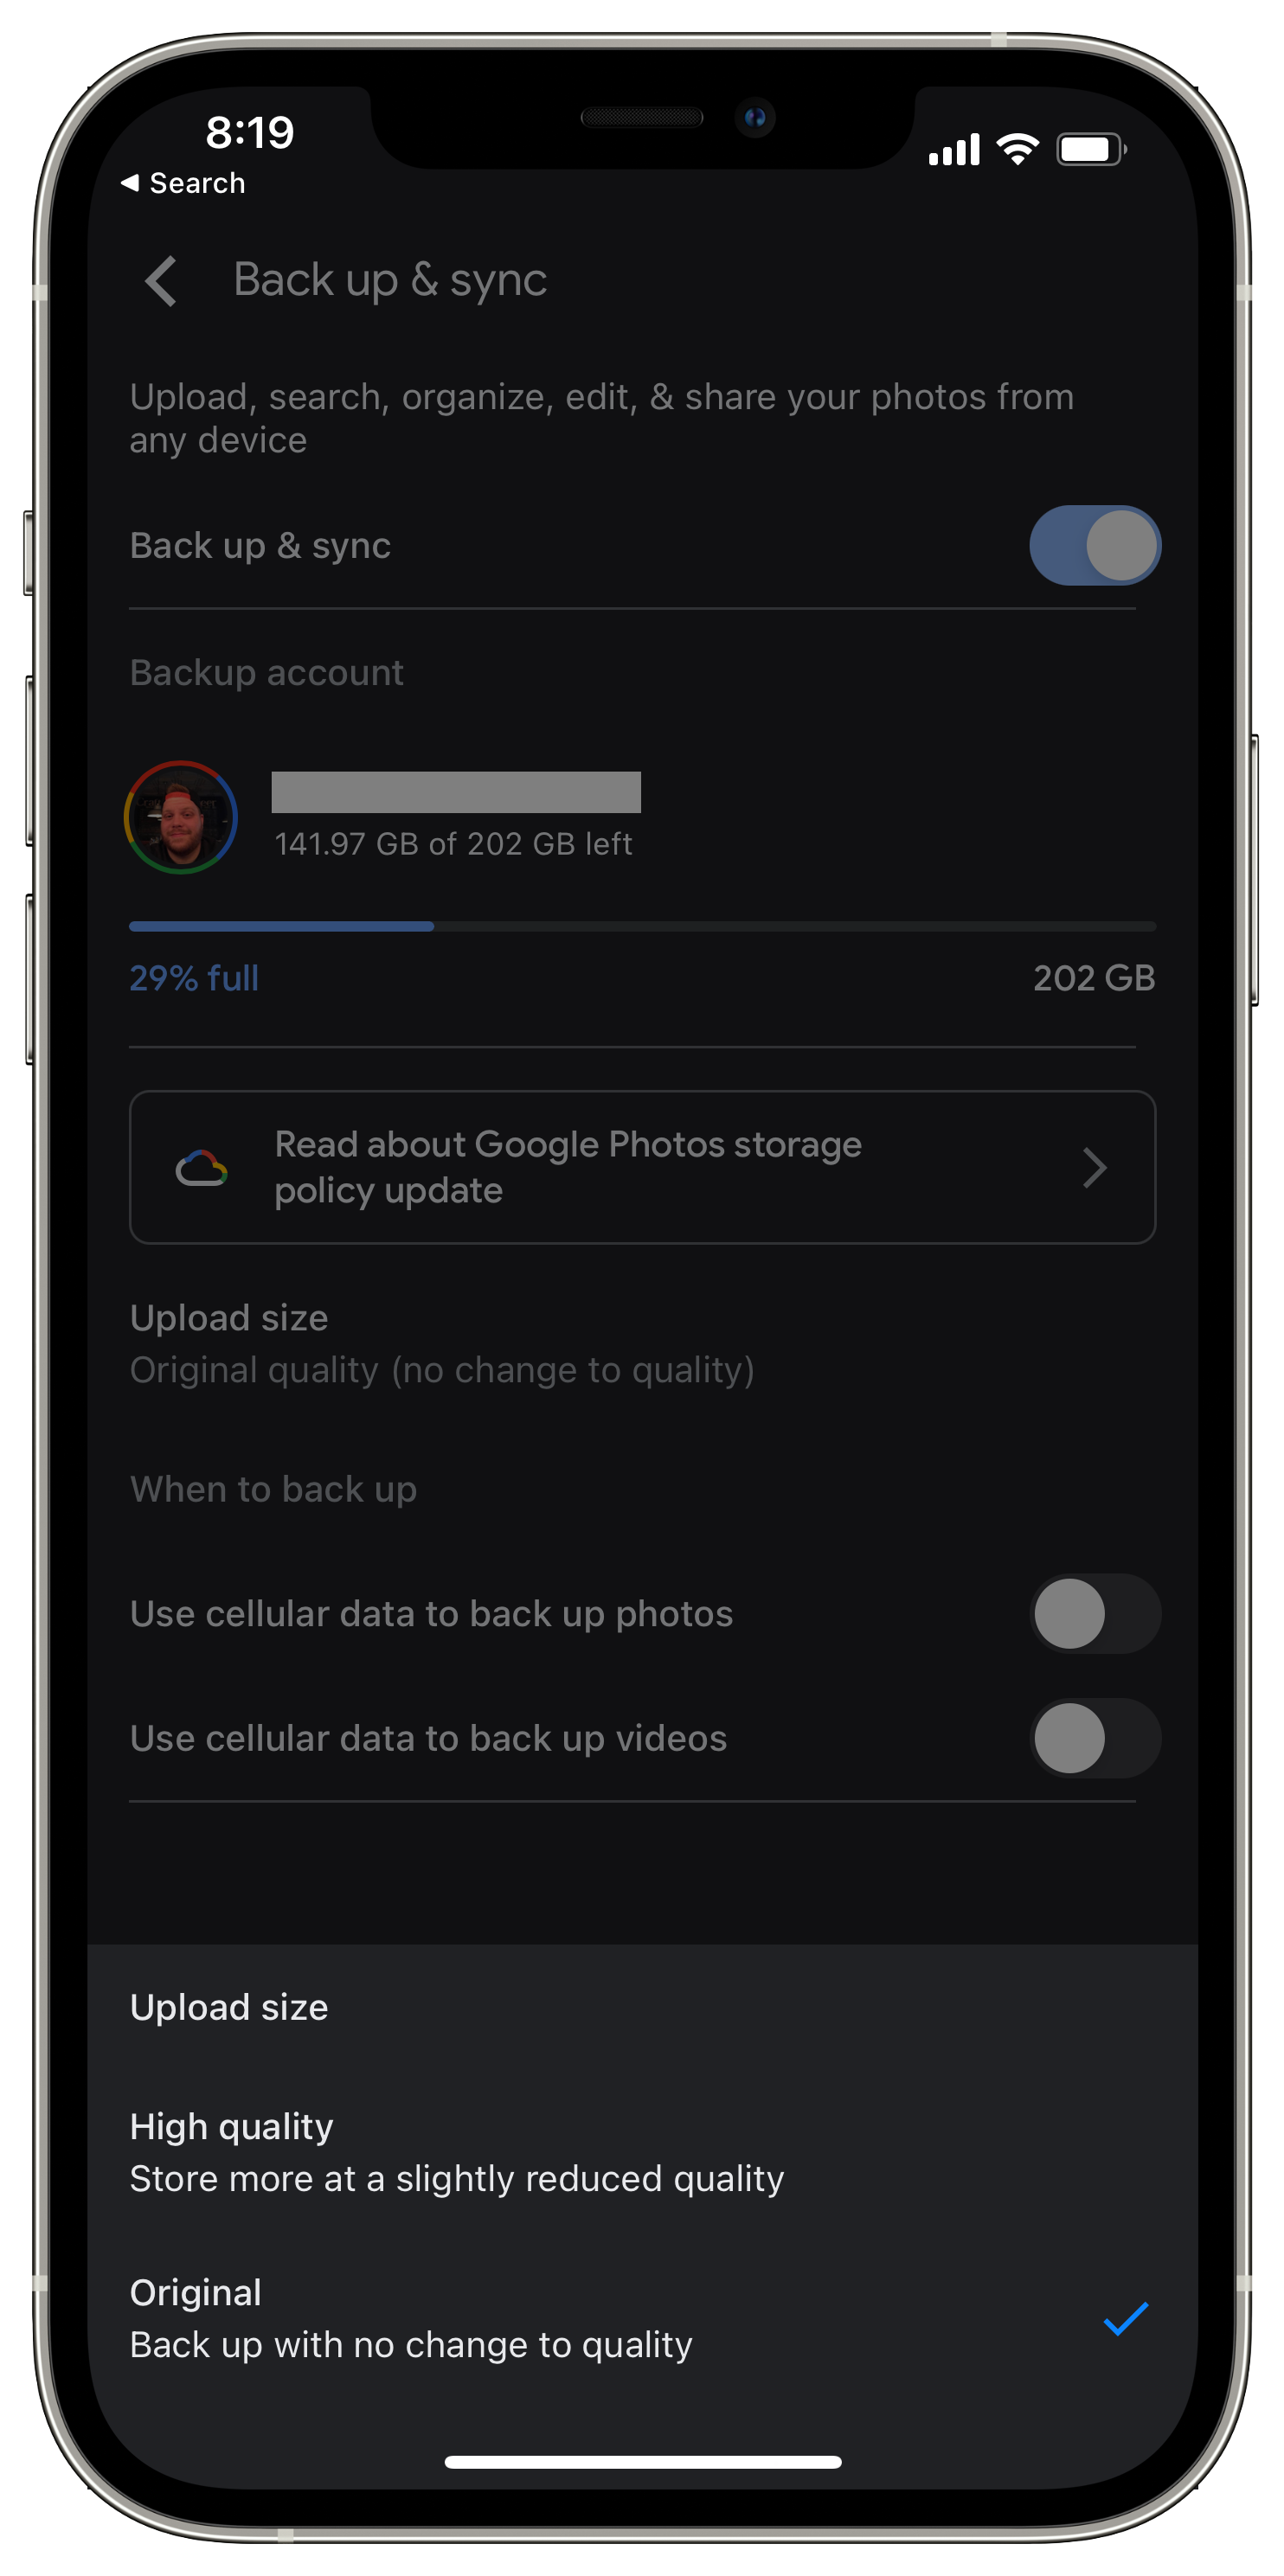 Upload Size options in Google Photos app